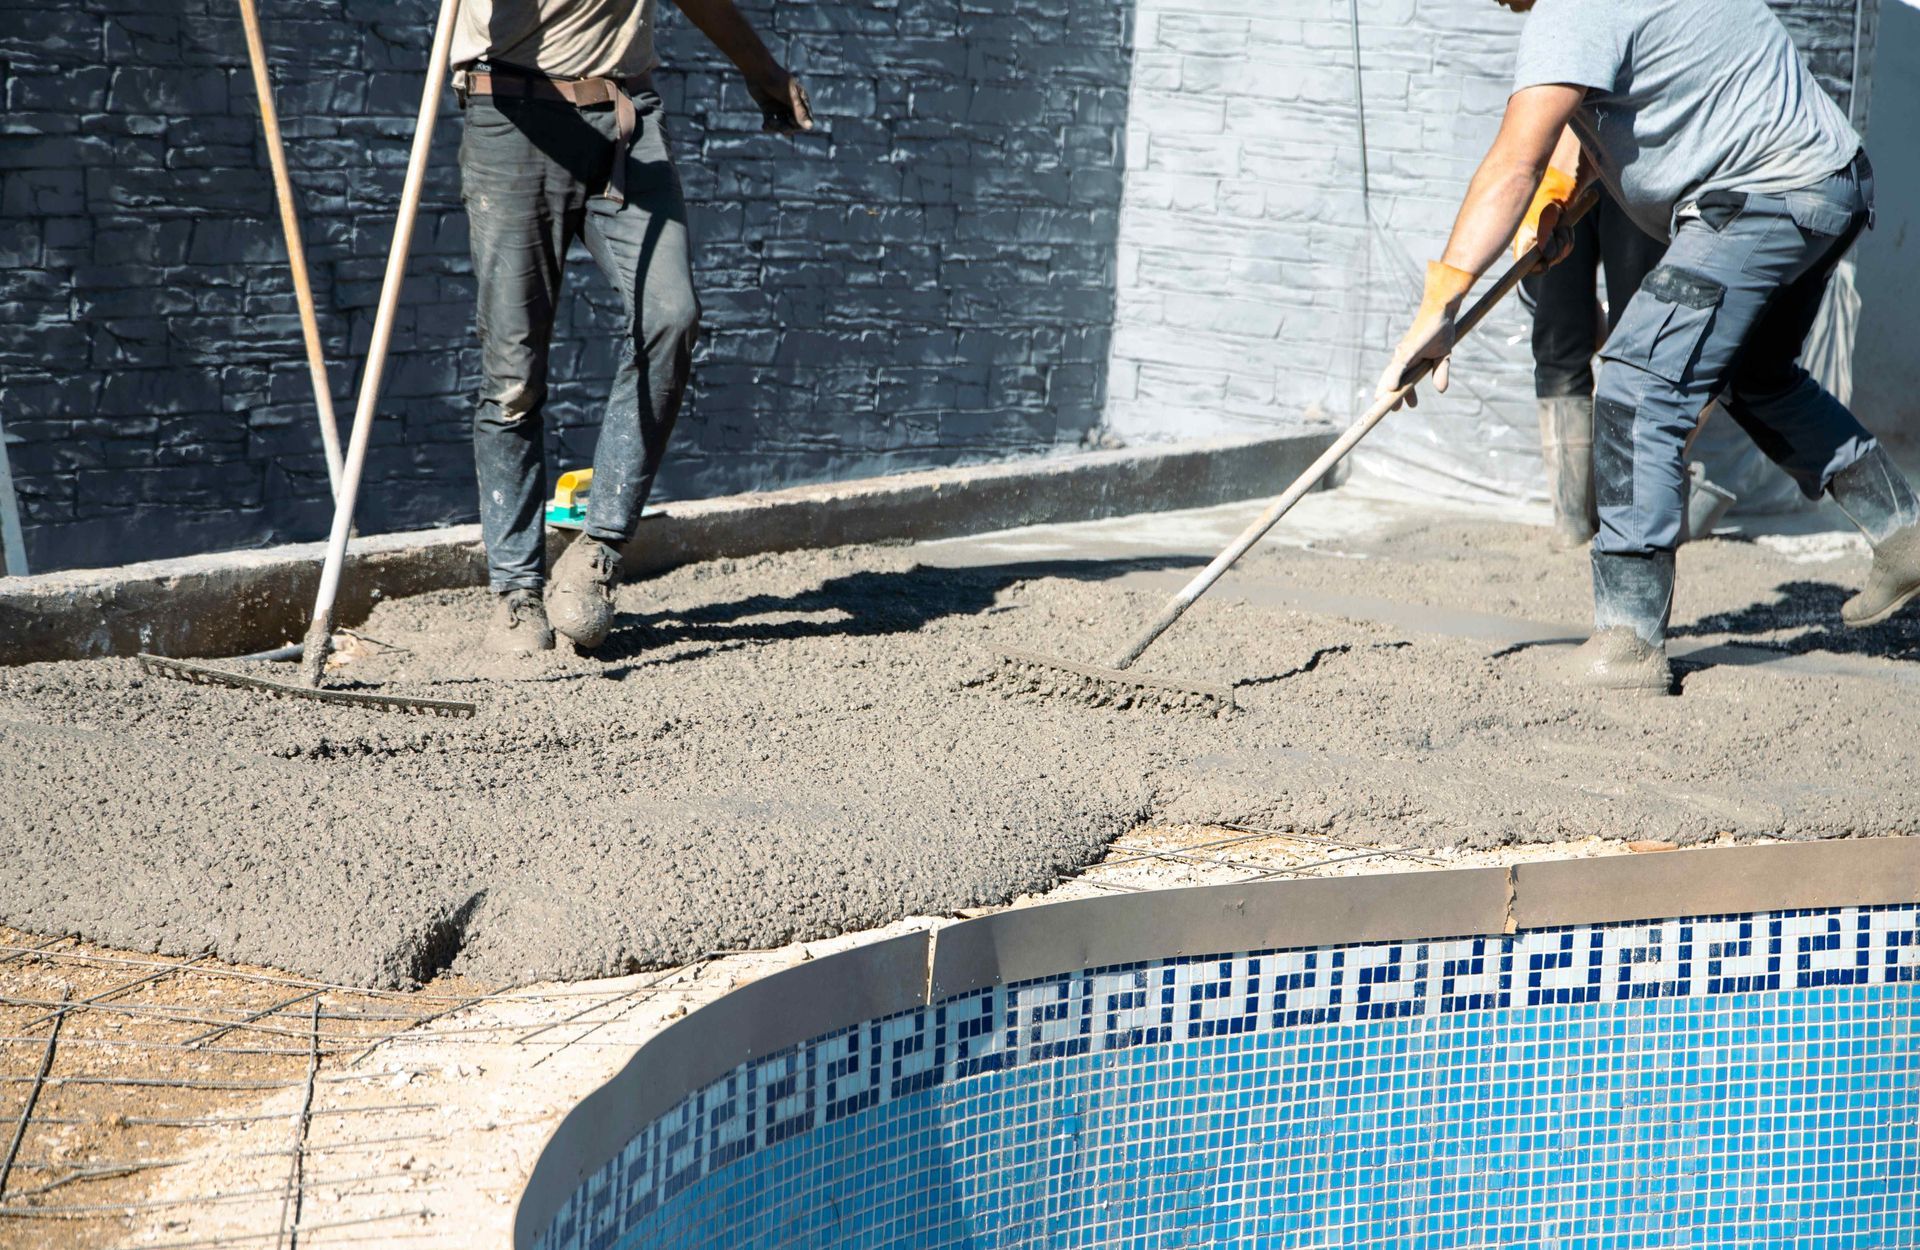 Pool contractors spreading concrete out for the hardscaping around the new pool